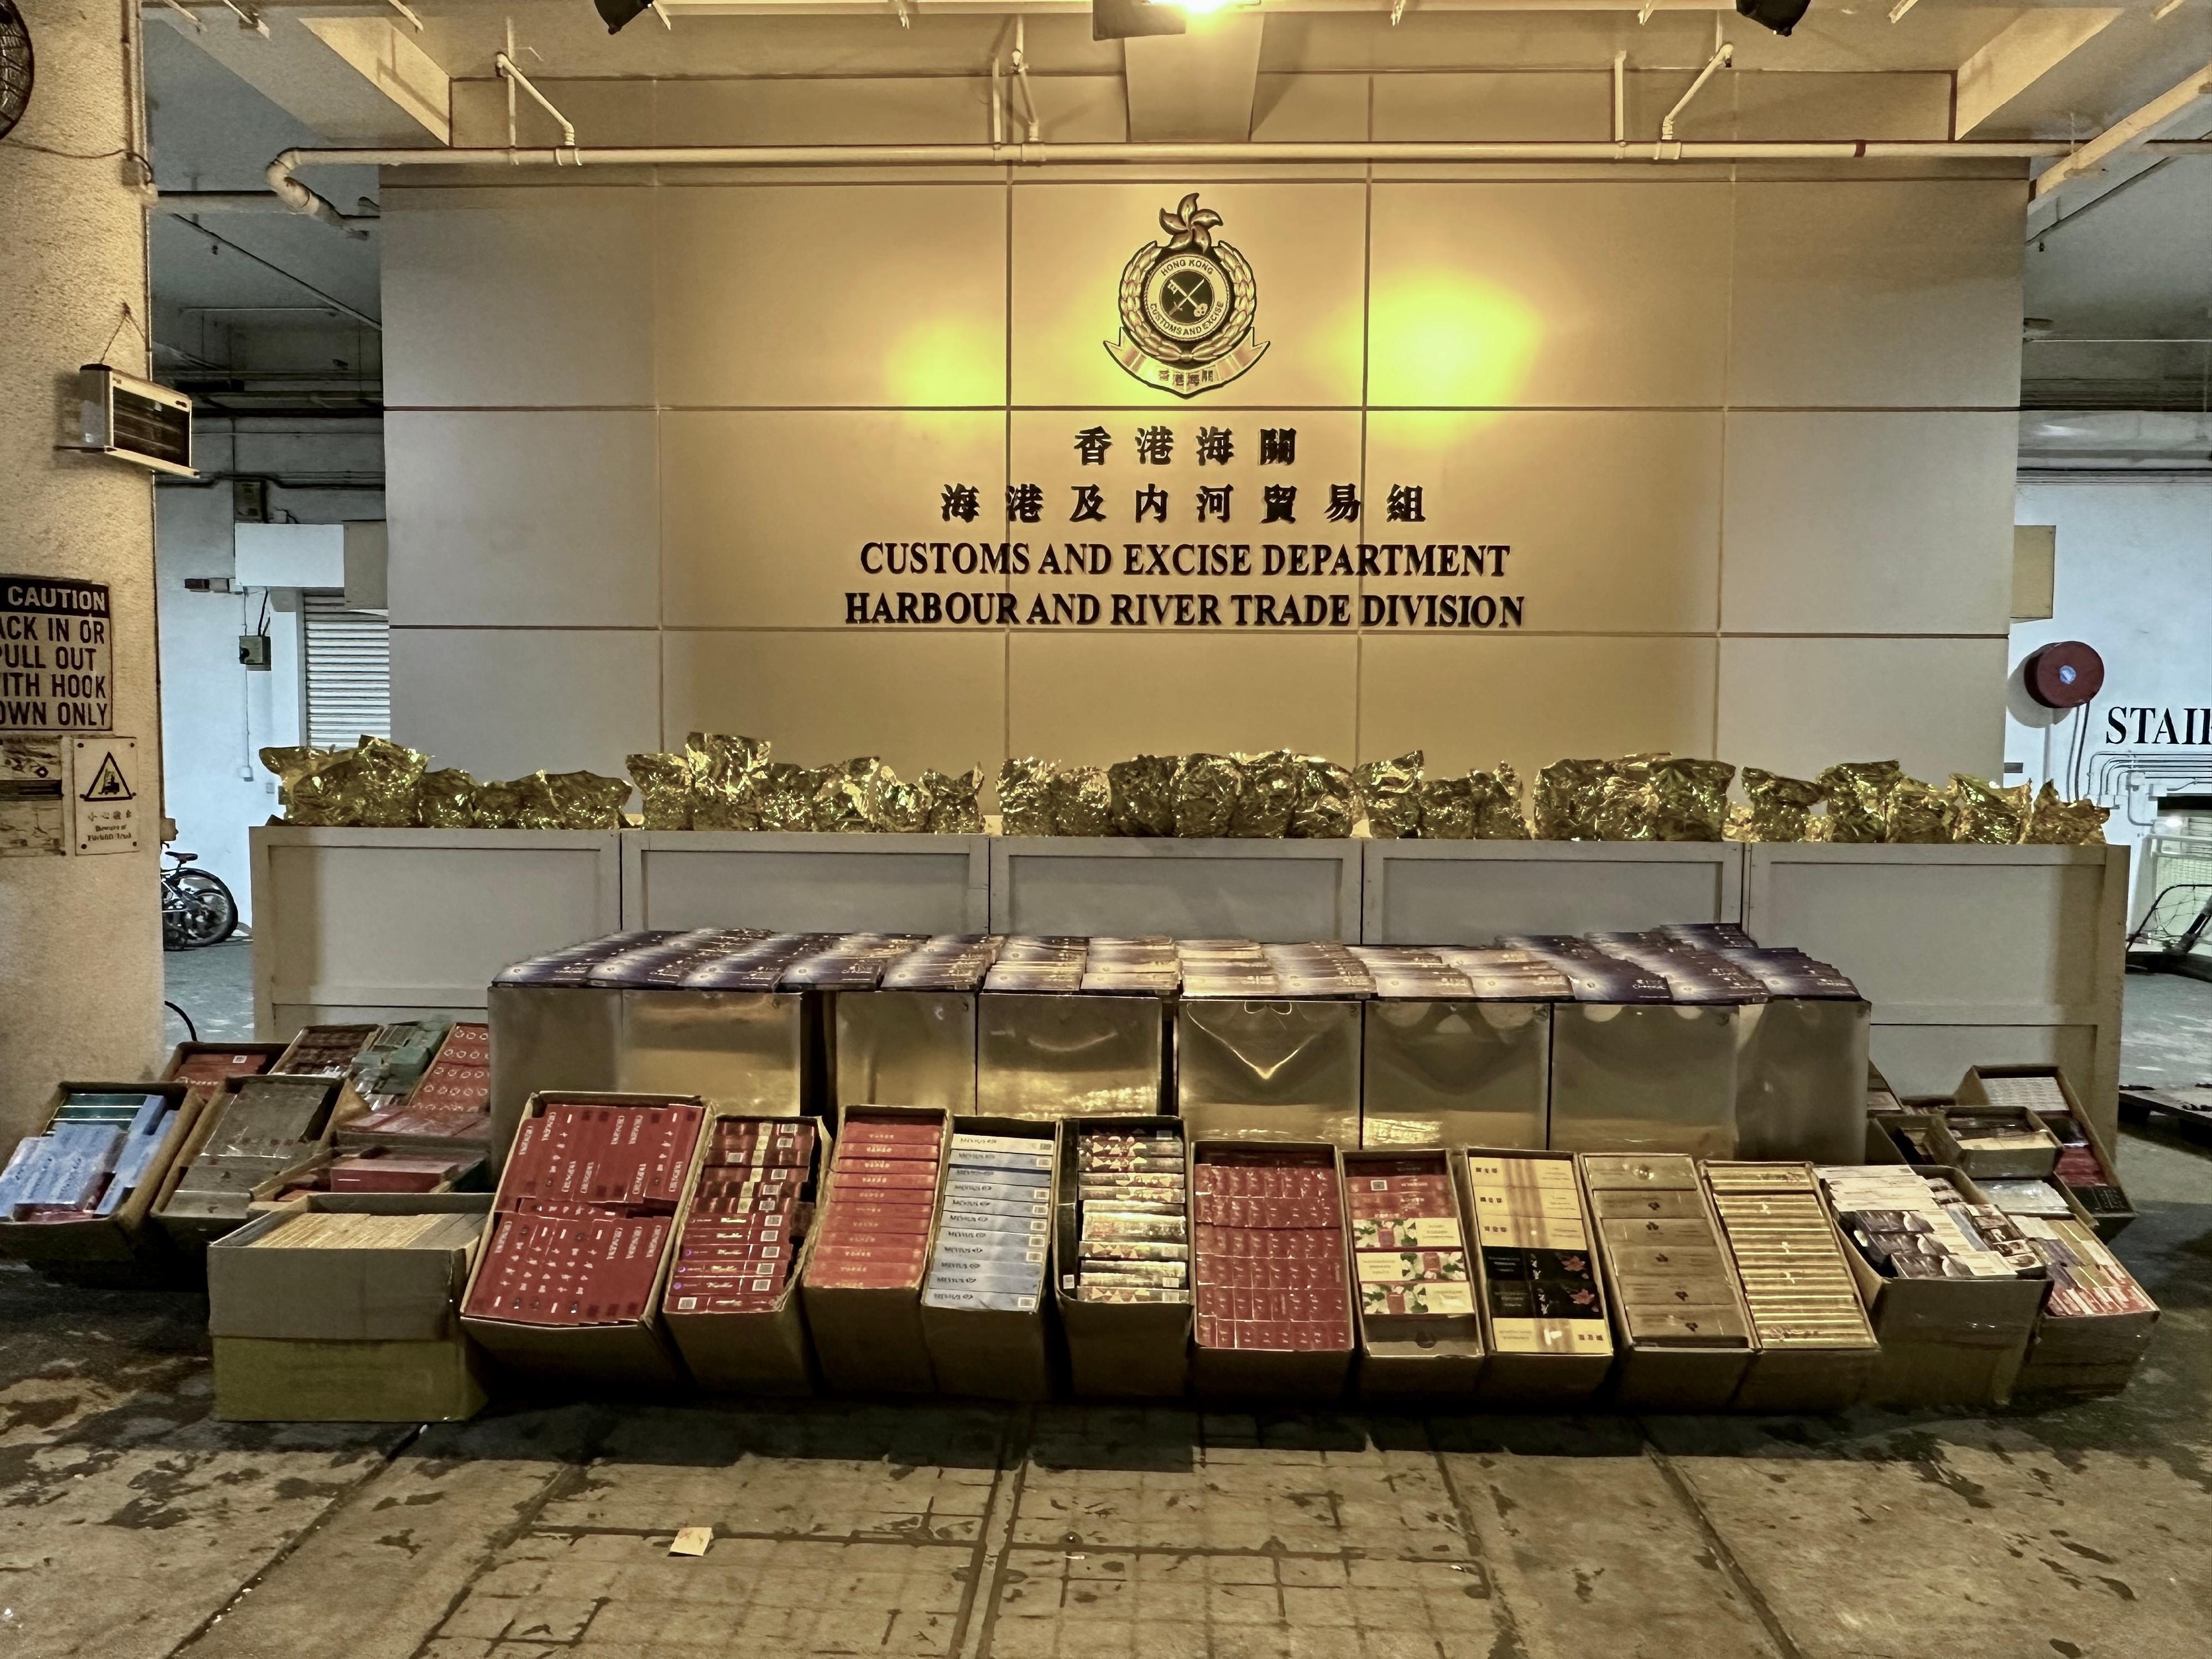 Hong Kong Customs on February 8 and 13 seized a batch of suspected smuggled tobacco products and liquor at the Tuen Mun River Trade Terminal Customs Cargo Examination Compound. It included about 1.5 million suspected illicit cigarettes, about 3 600 kilograms of suspected duty-not-paid manufactured tobacco and about 20 litres of suspected duty-not-paid liquor. The total estimated market value was about $14 million, with a duty potential of about $11 million. Photo shows the suspected smuggled tobacco products seized by Customs officers on February 8.